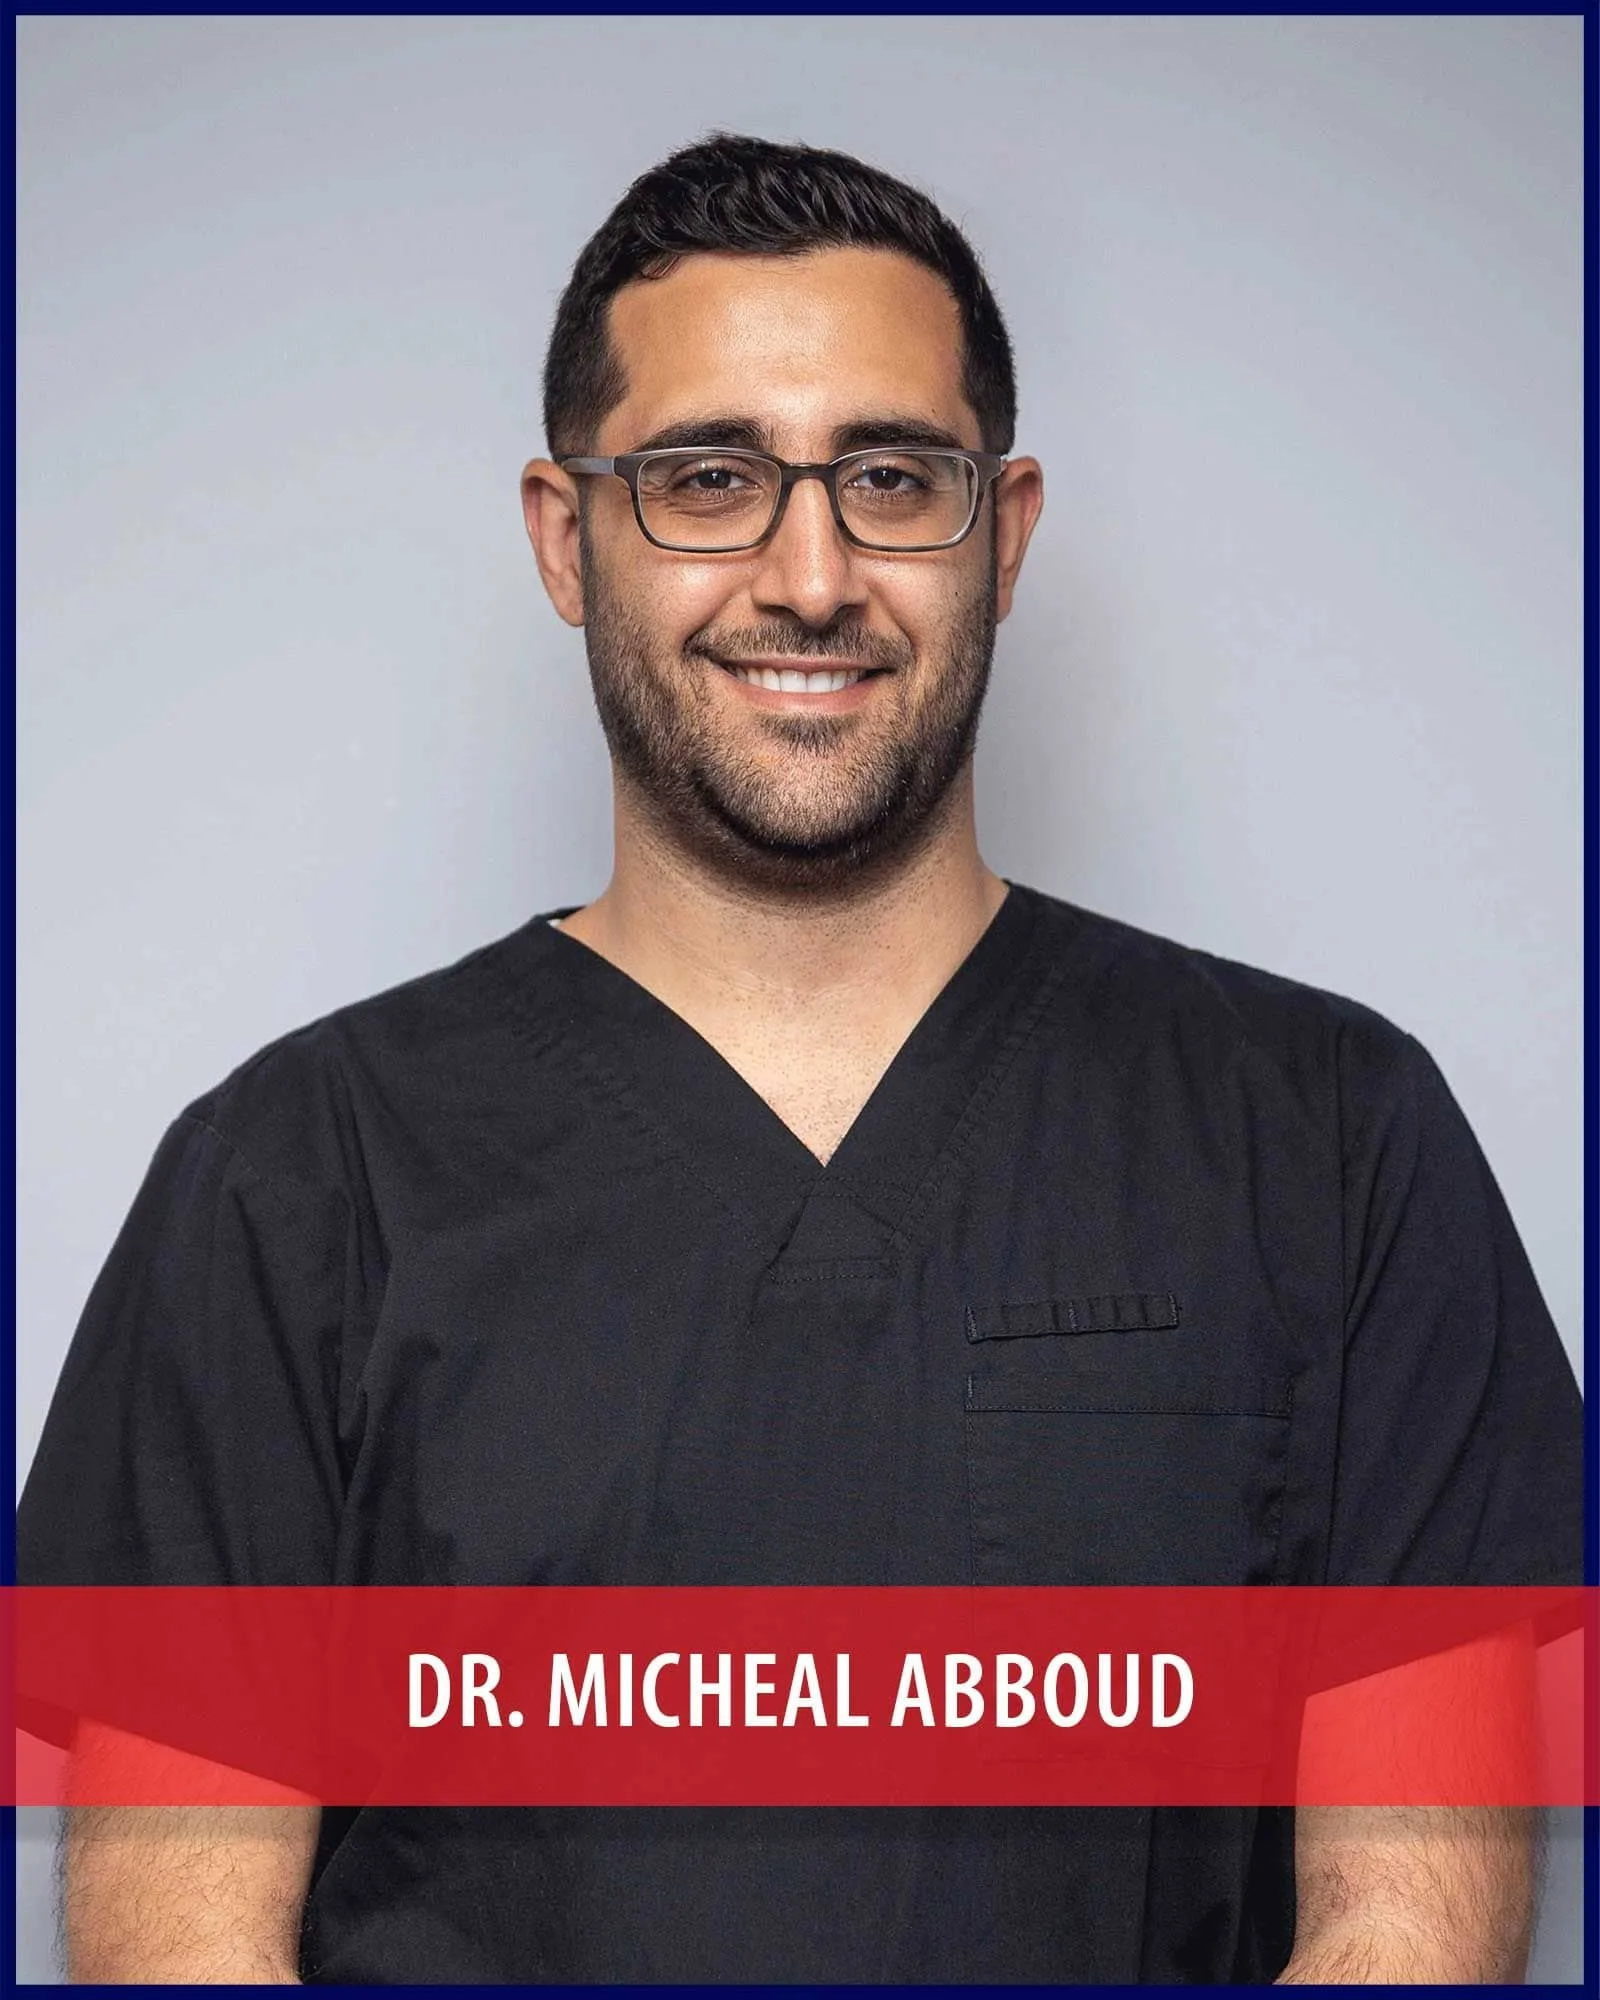 Dr. Micheal Abboud